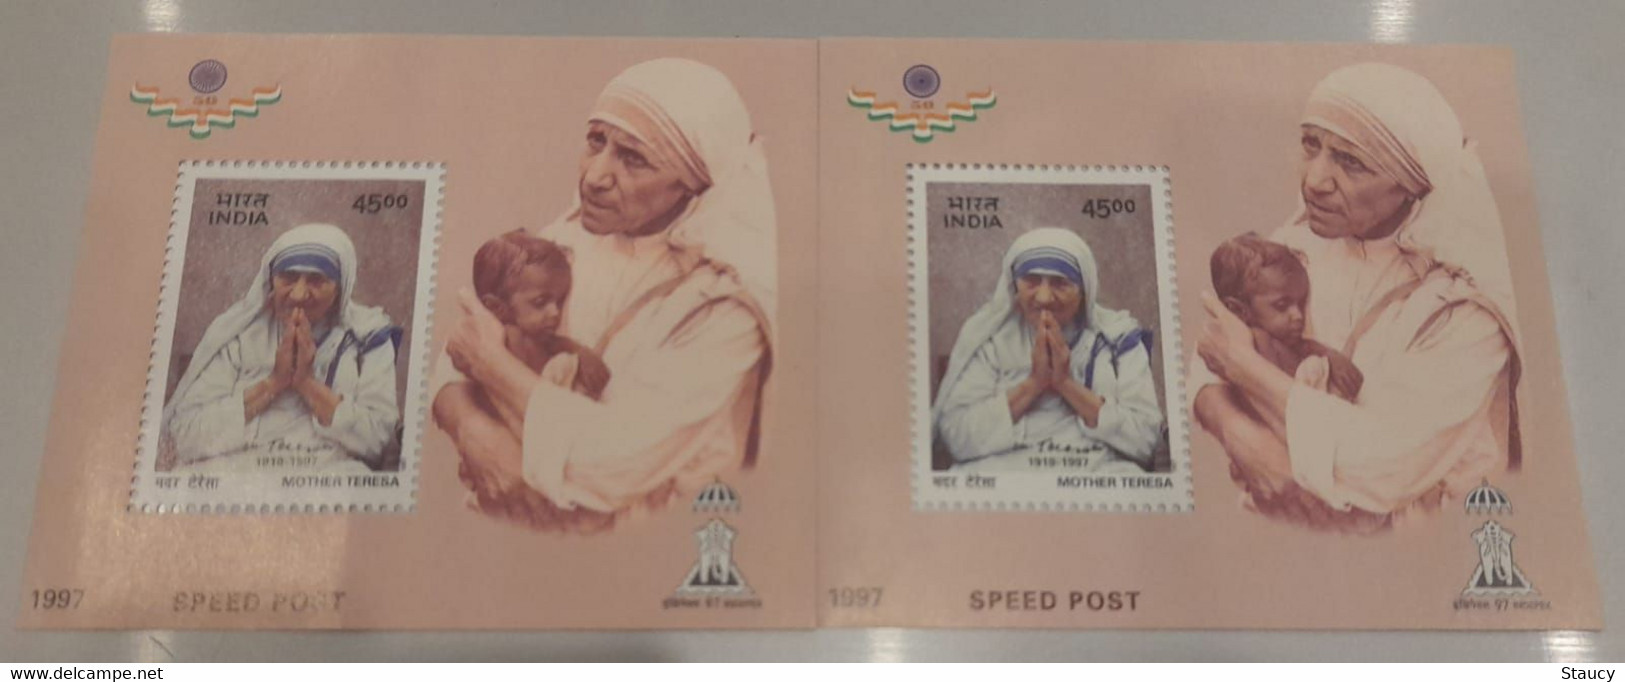 India 1997 Error Mother Teresa Speed ​​Post 2 Miniature Sheets Right One Is "DRY PRINT" MS MNH - Mother Teresa